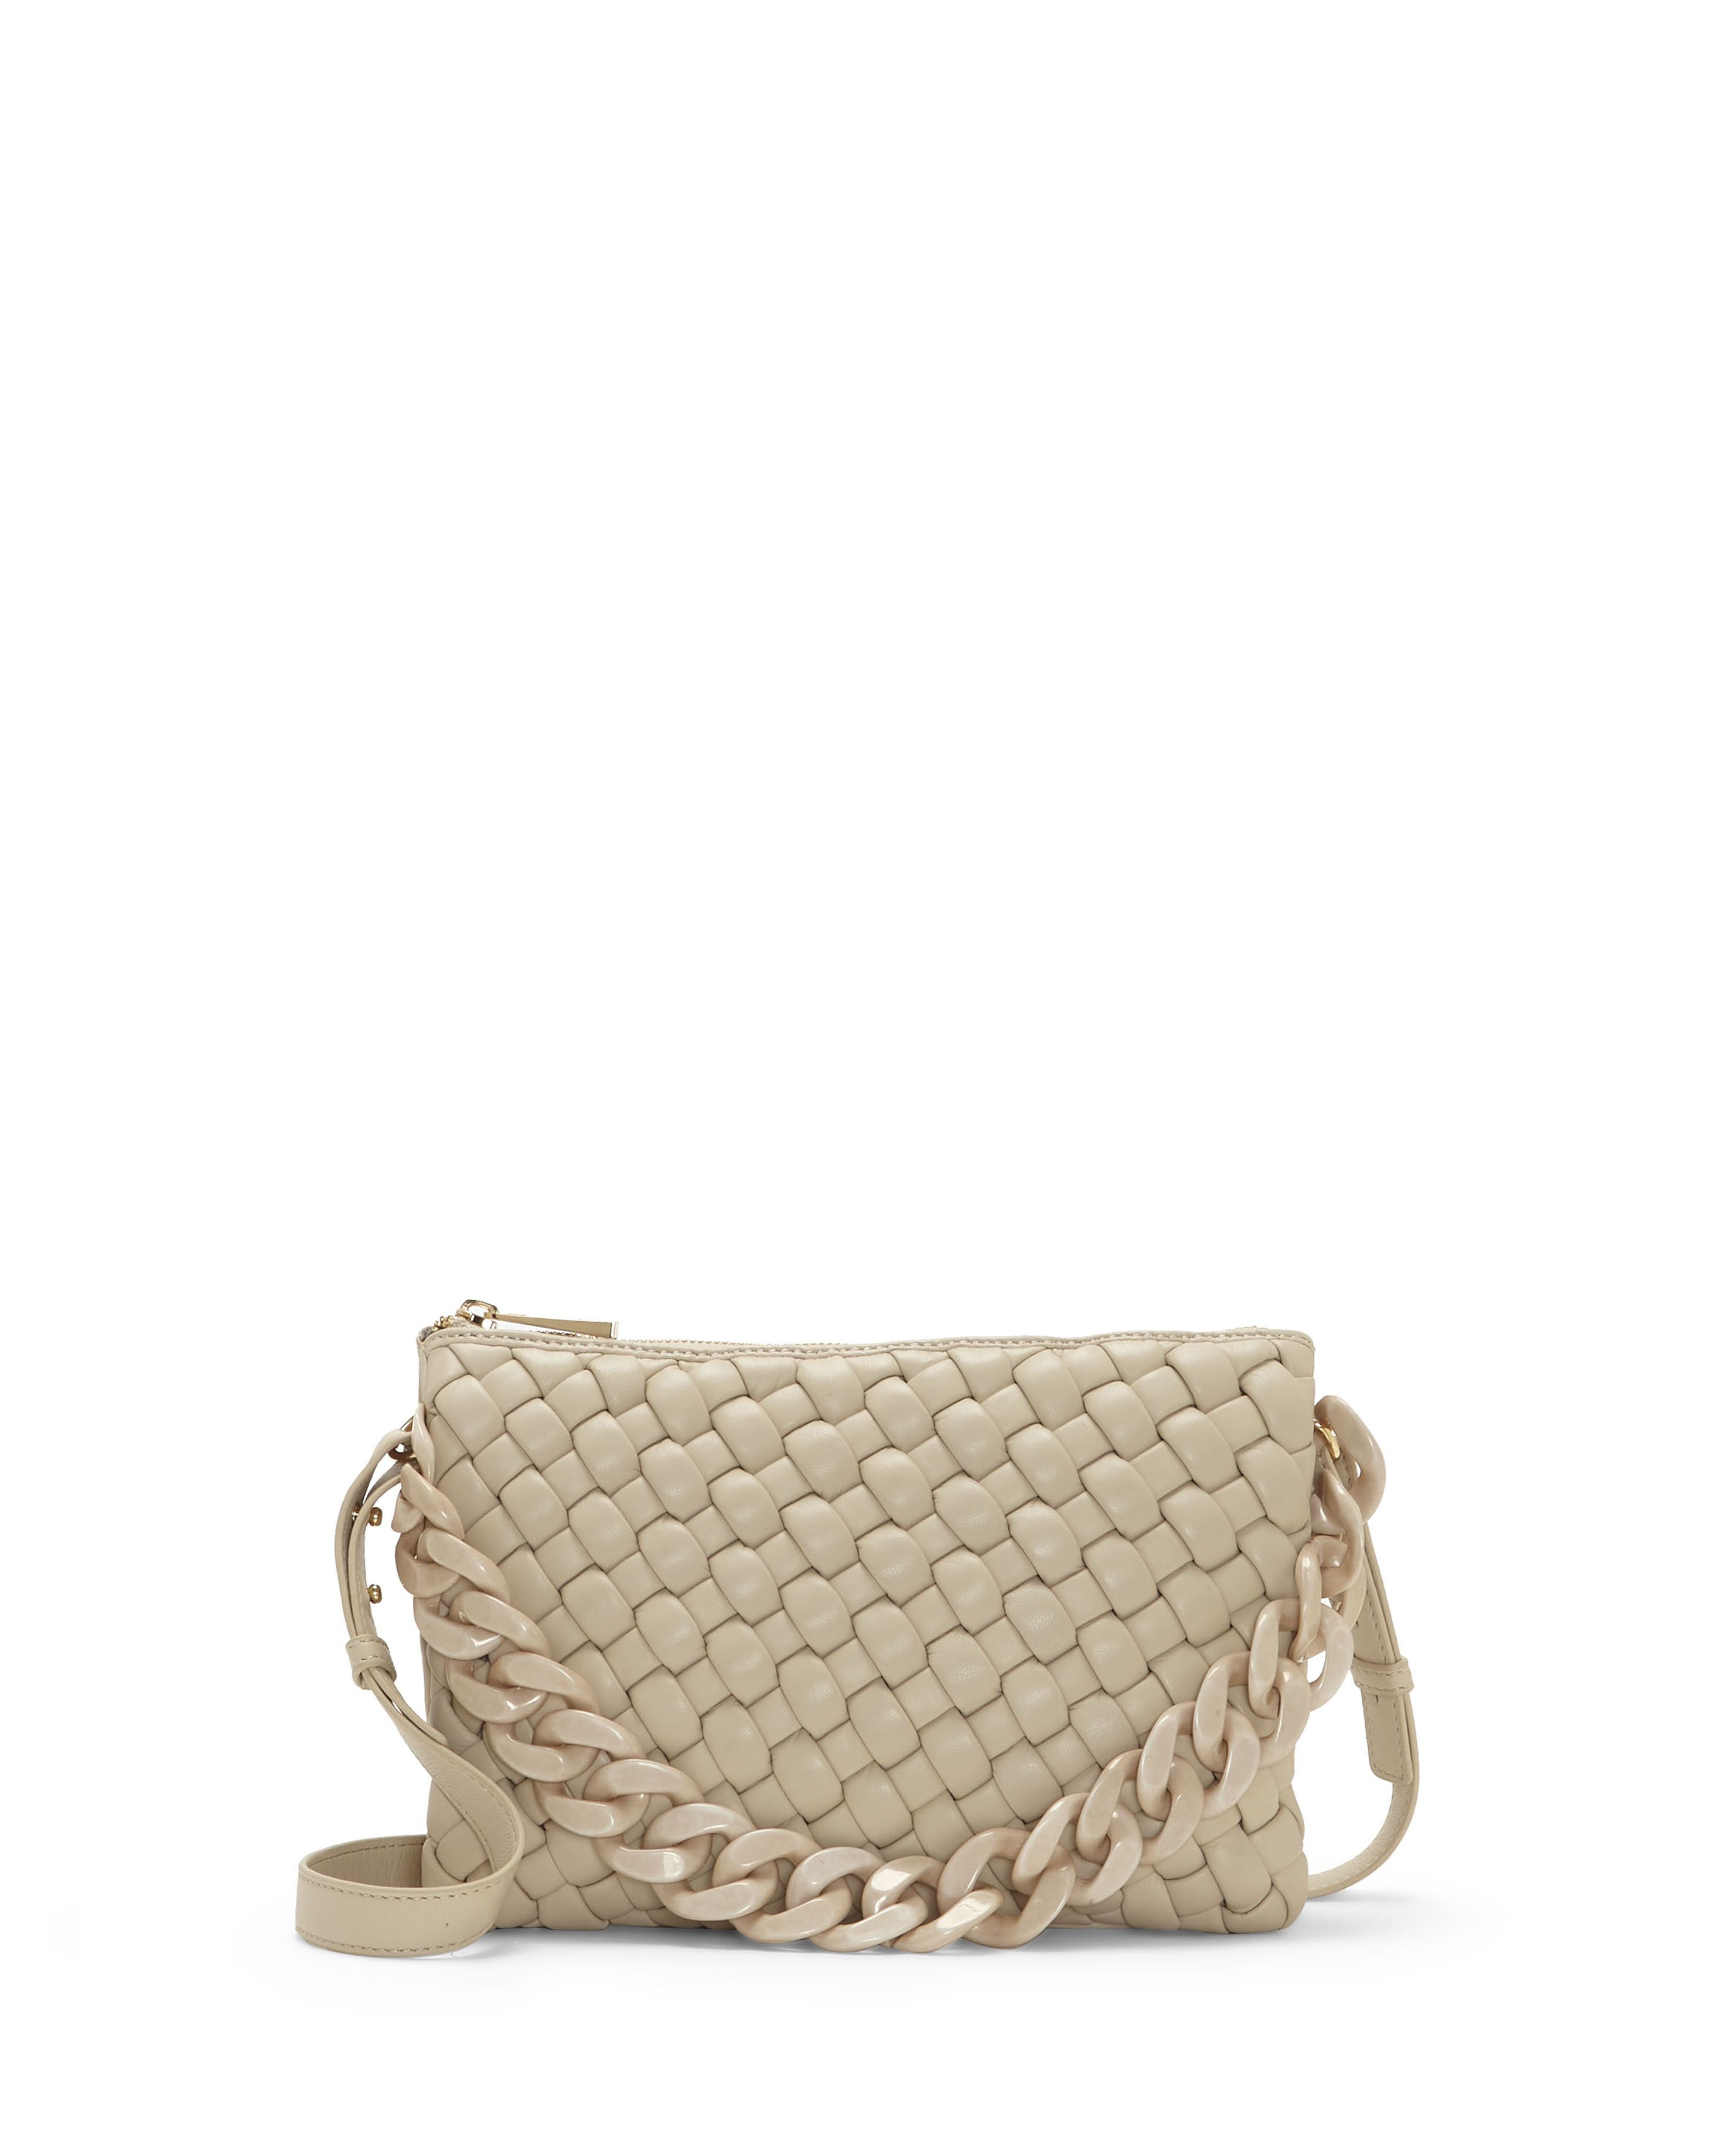 Vince Camuto Adyna Large Crossbody Bag1 | Vince Camuto